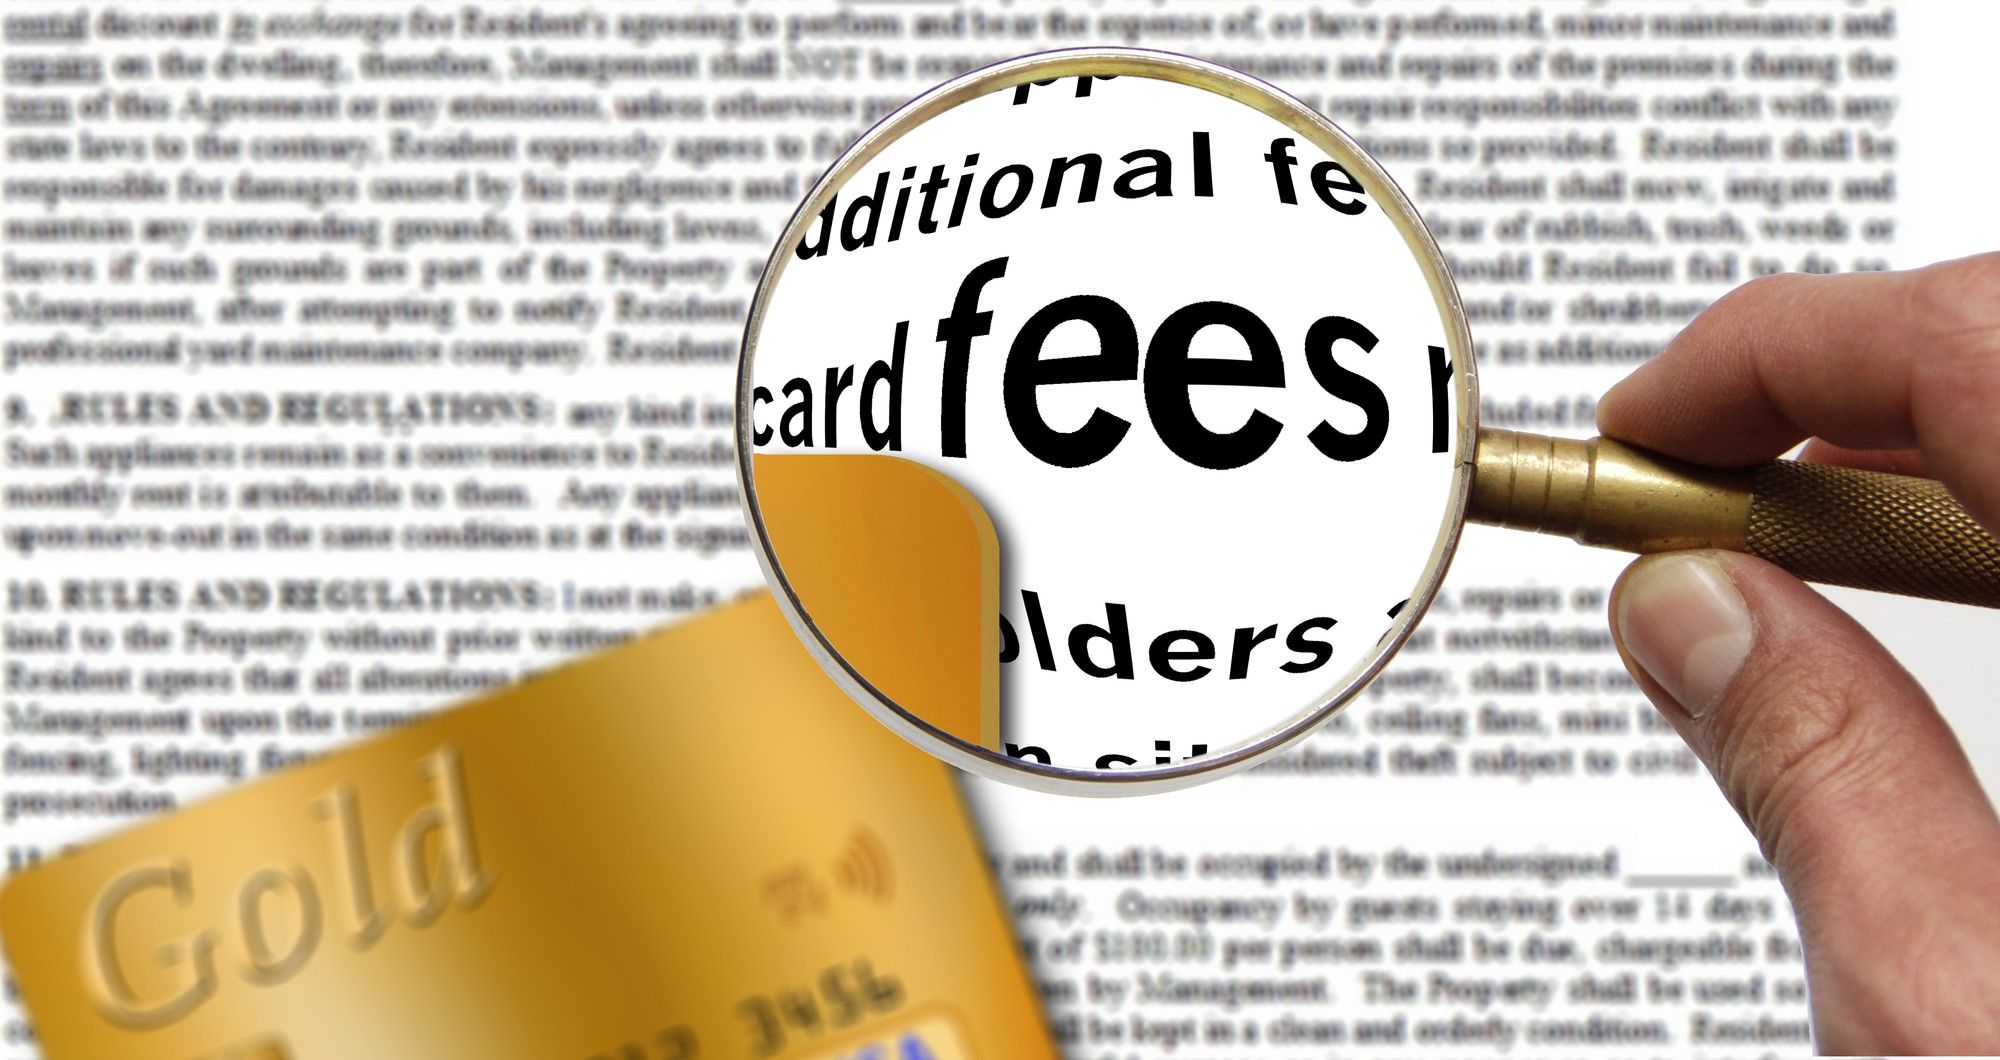 Spectrum internet may come with hidden fees.